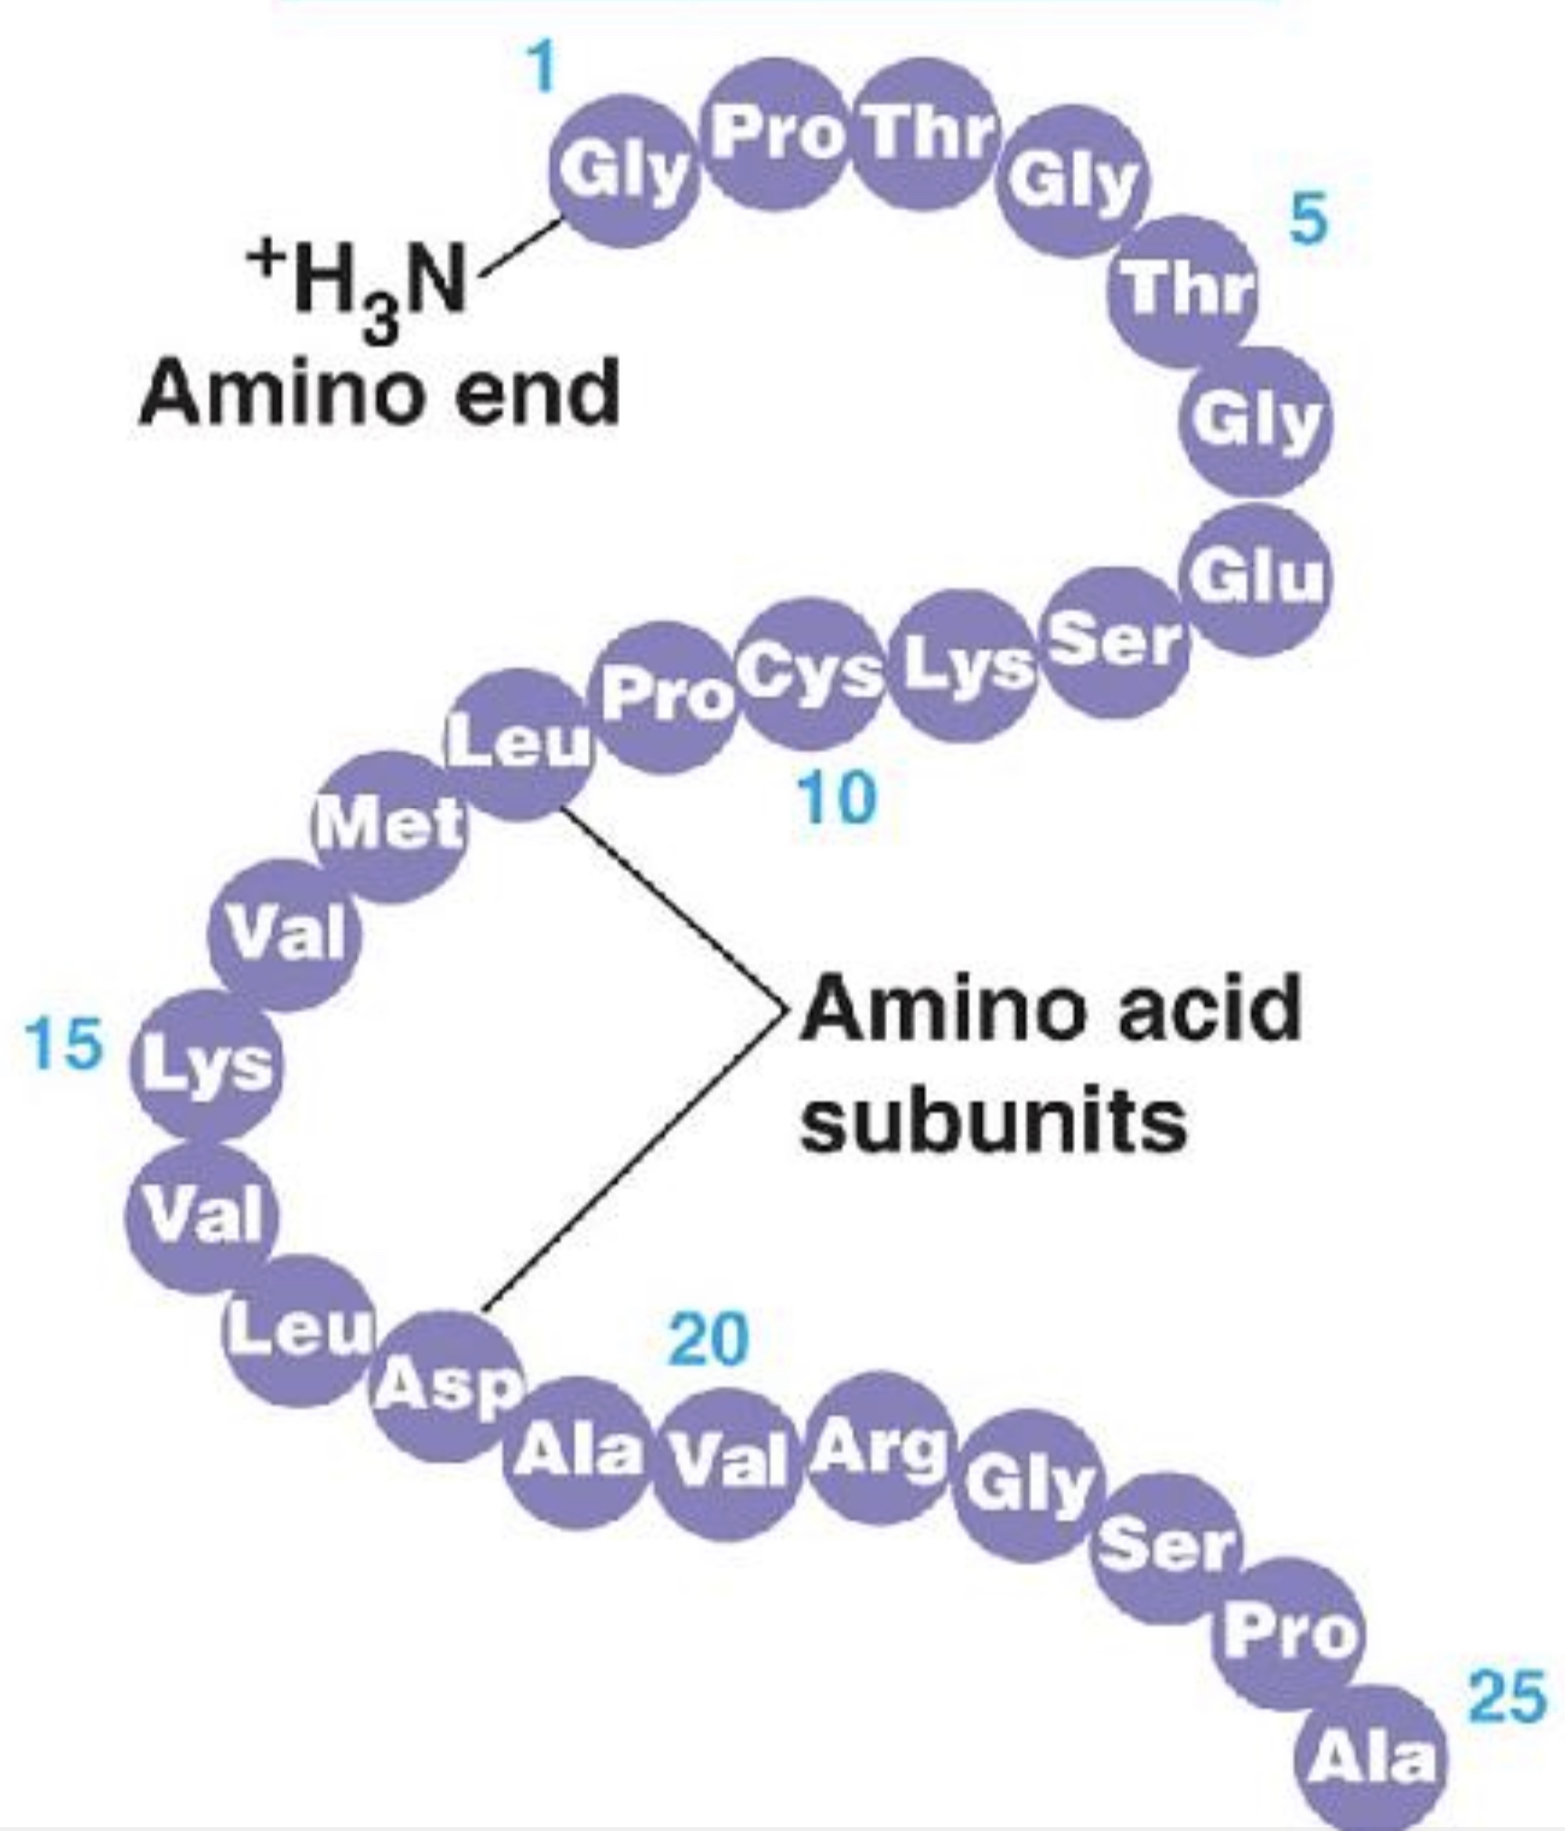 <ul><li><p>the sequence of amino acids in a protein, is like the order of letter in a long word</p></li><li><p>determined by inherited genetic information</p></li></ul>